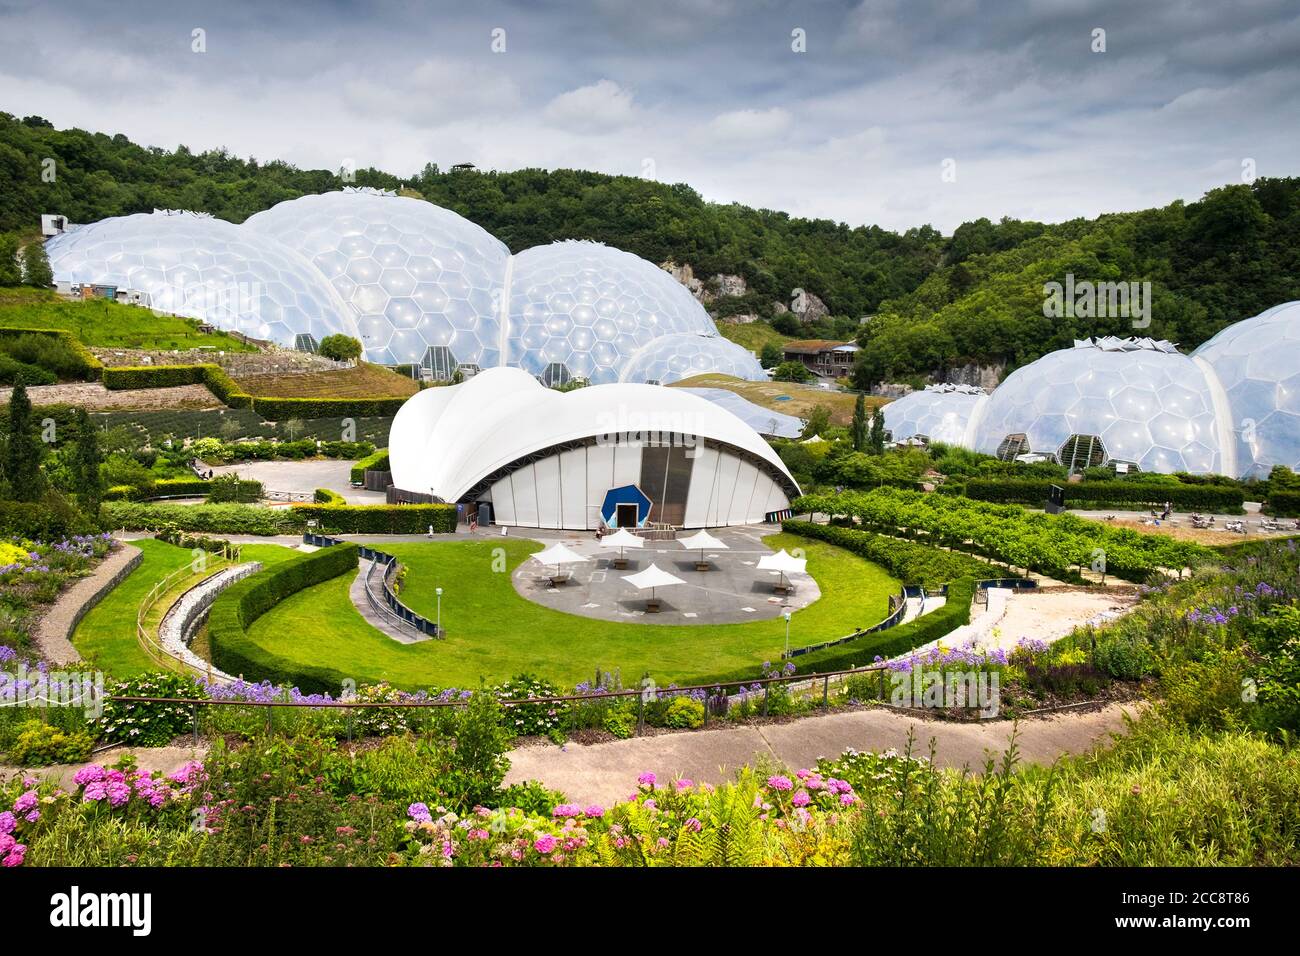 The geodesic biome domes at the Eden Project a tourist attraction in Cornwall. Stock Photo